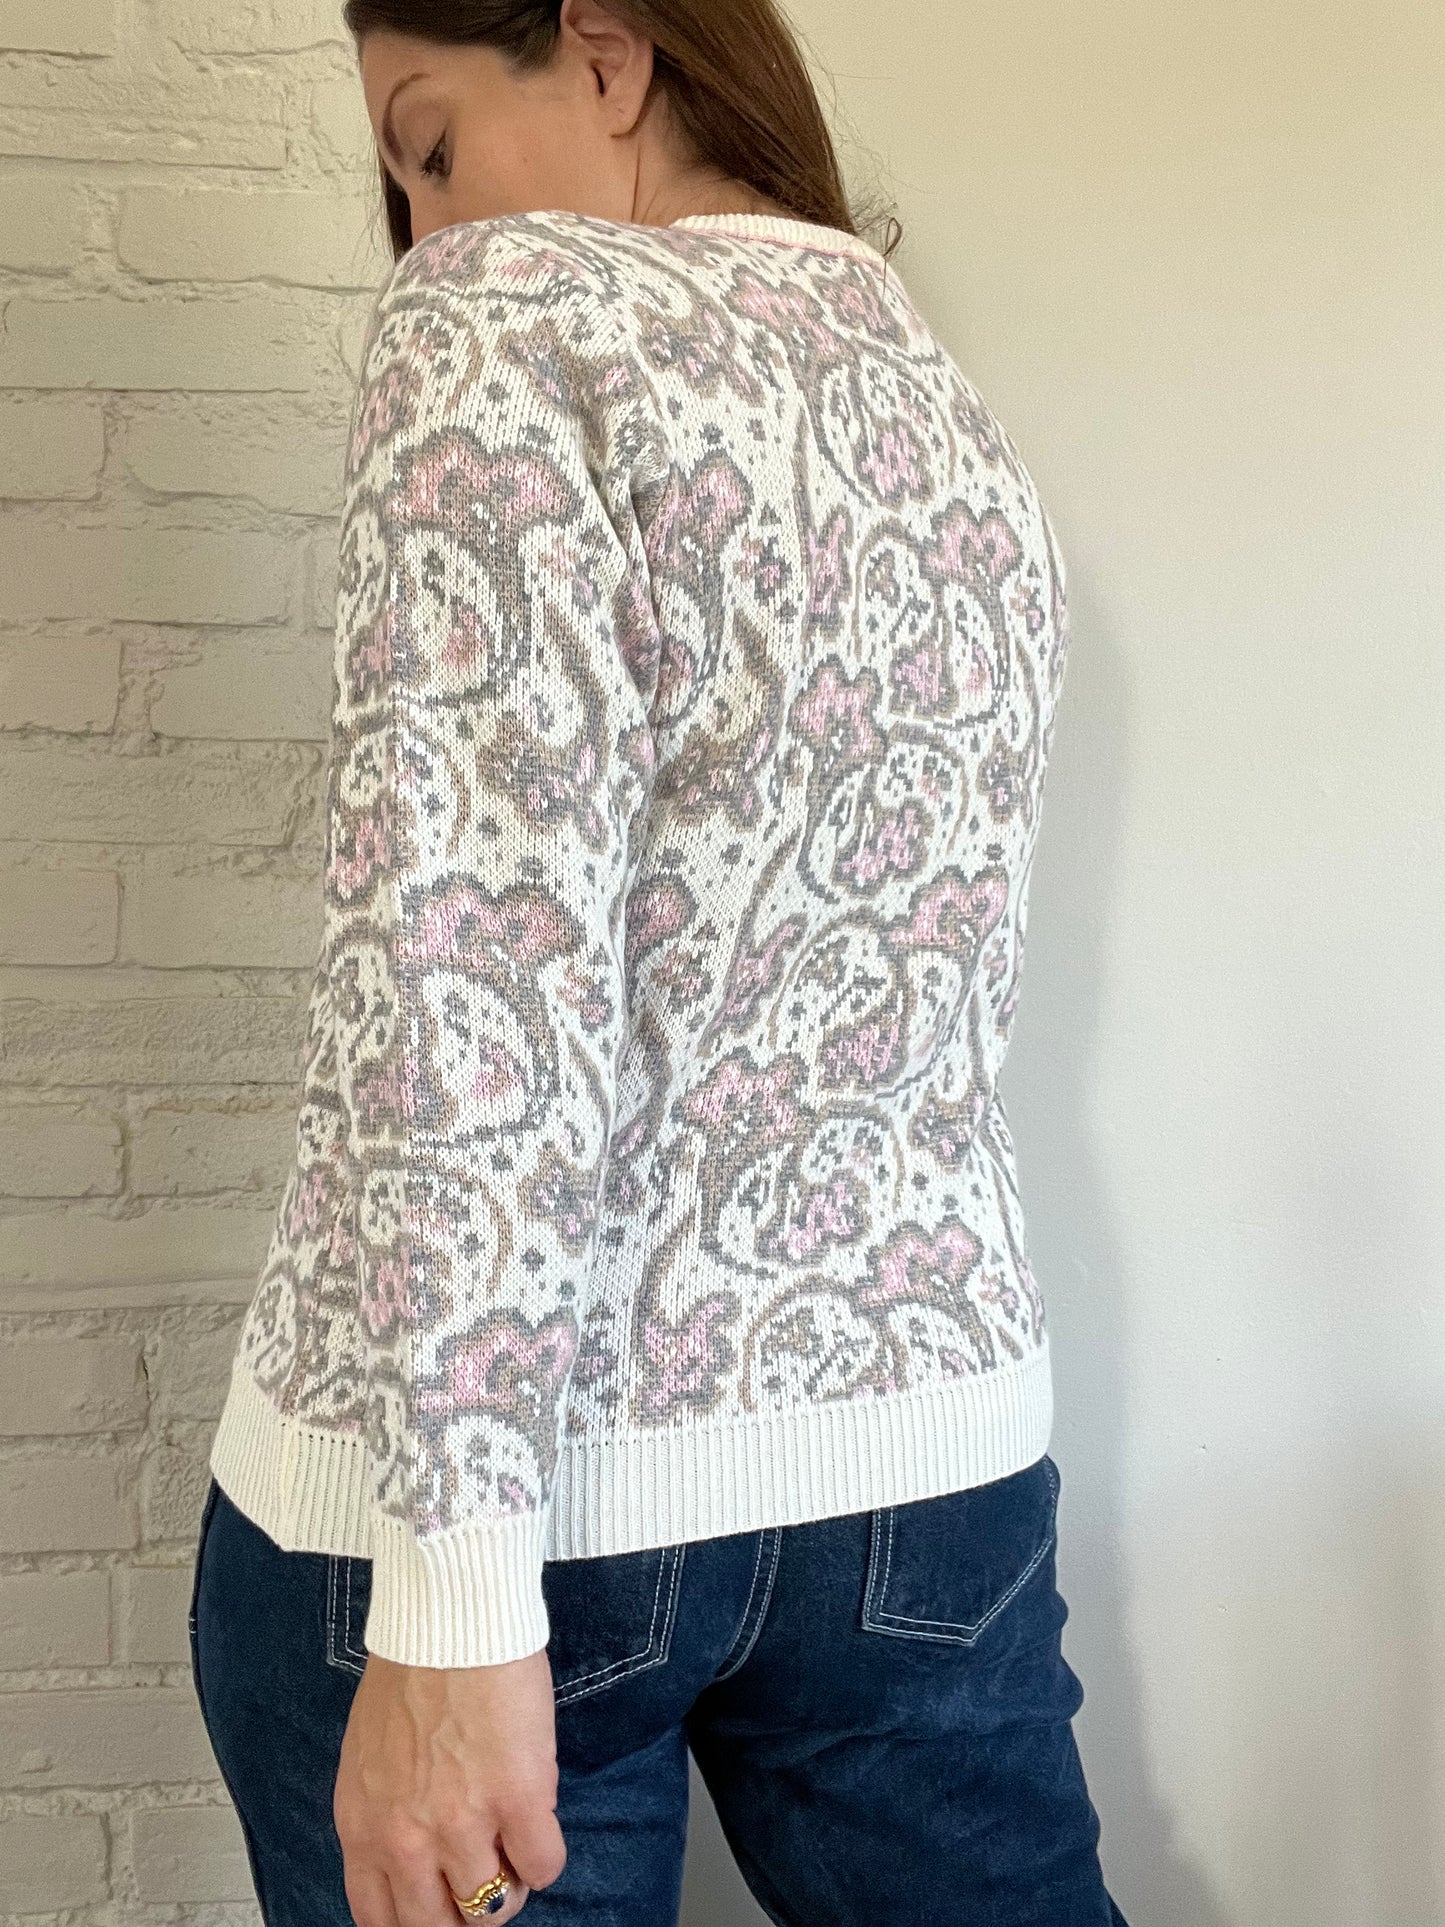 Creamy Floral Knit Sweater - Size M